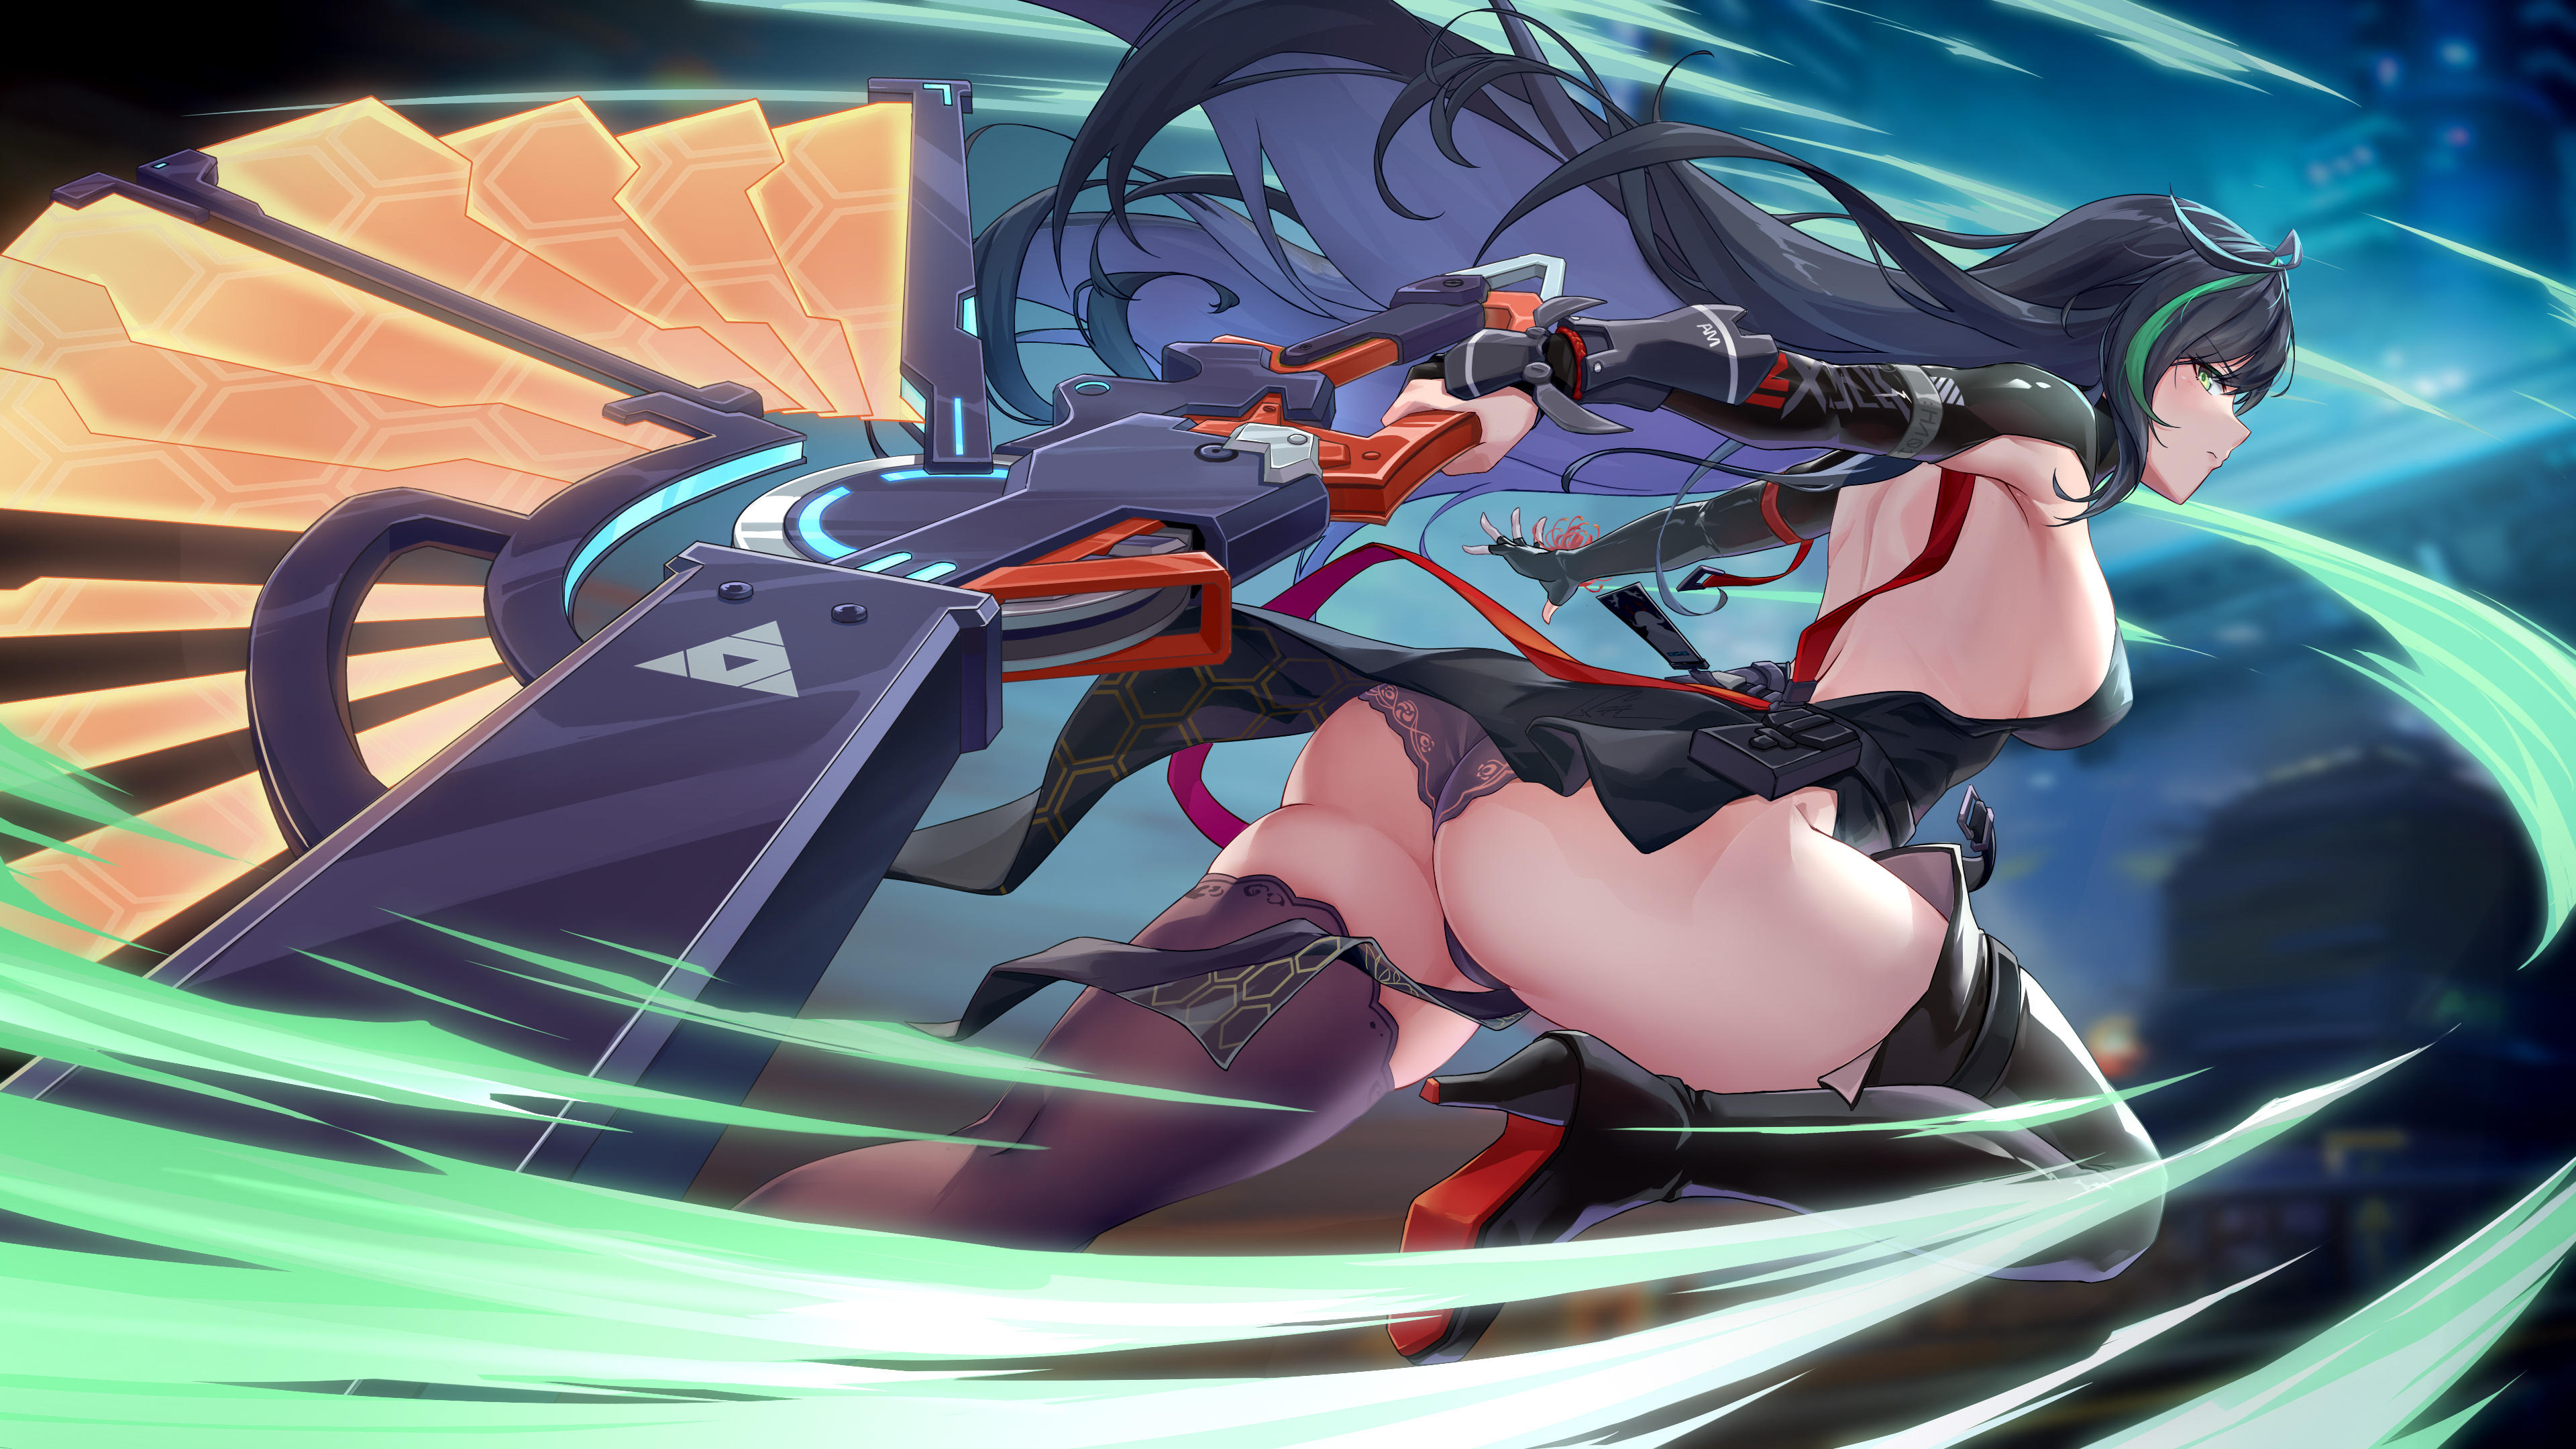 Anime 3840x2160 Lazgear anime girls ass Lin (Tower of Fantasy) back Tower of Fantasy sideboob armpits rear view black hair green eyes thick ass thick thigh panties purple panties weapon underwear big boobs high heeled boots boots stockings black dress dress purple stockings looking back long hair looking at viewer running two tone hair thighs elbow gloves high heels fingerless gloves ahoge bareback Pixiv